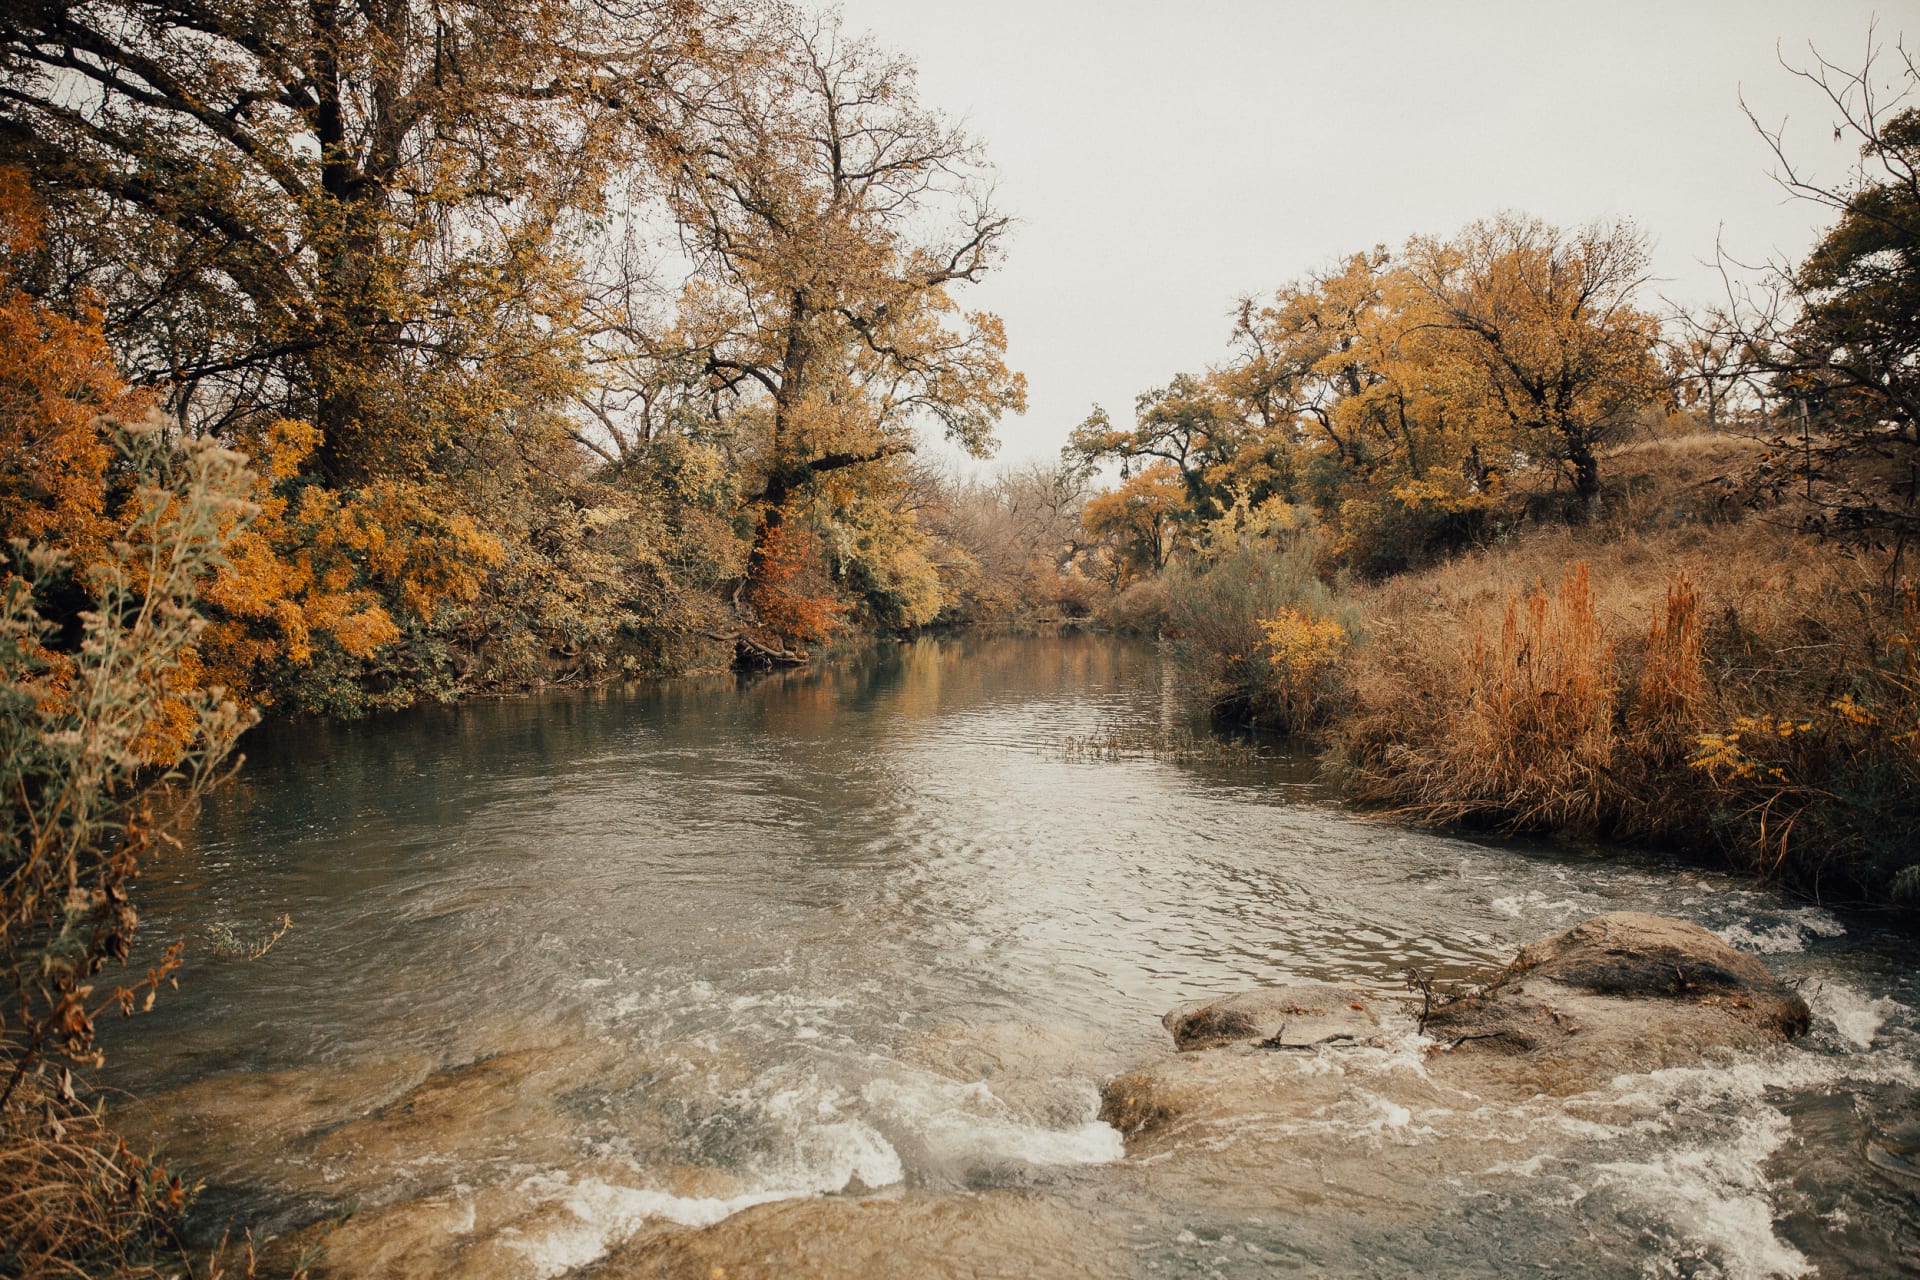 The beautiful view of the San Saba River, just a stone's throw away from camp 